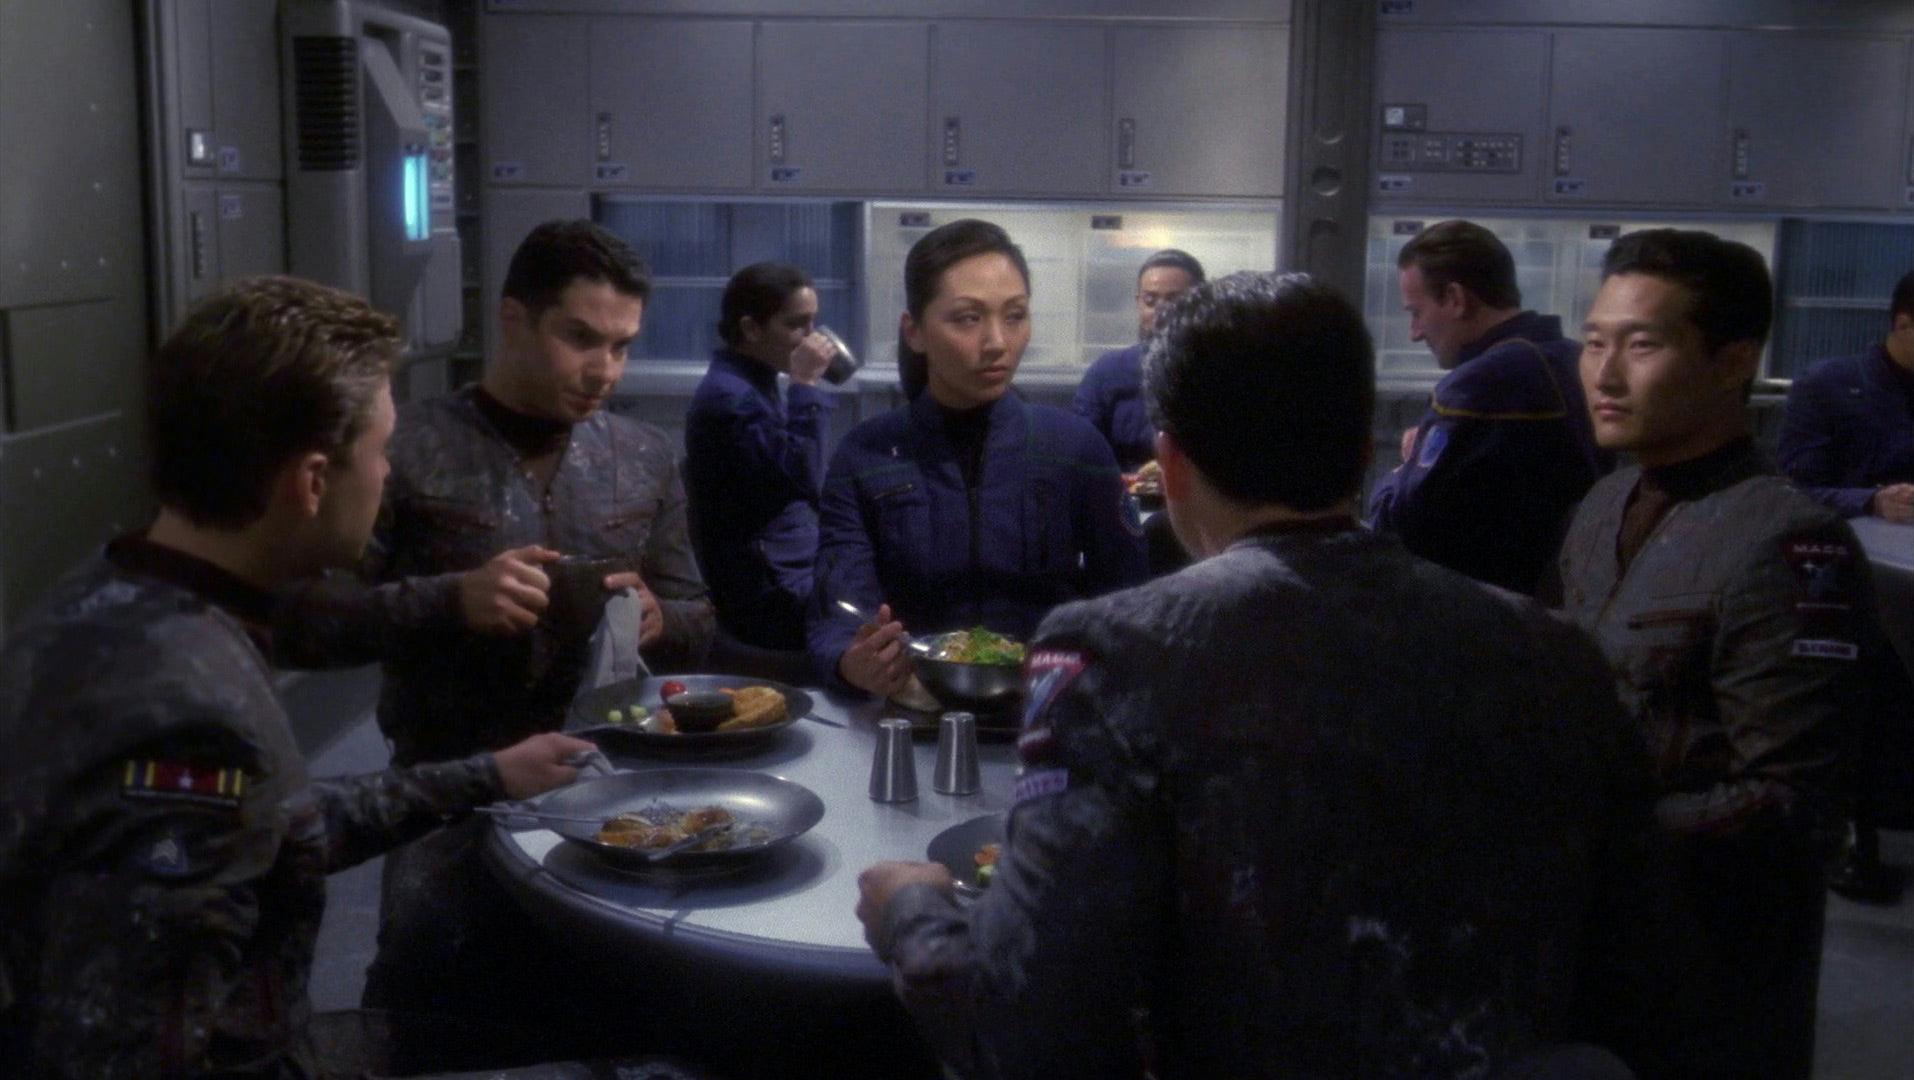 MACO soldiers sit around a table eating a meal in the Enterprise mess hall on Star Trek: Enterprise